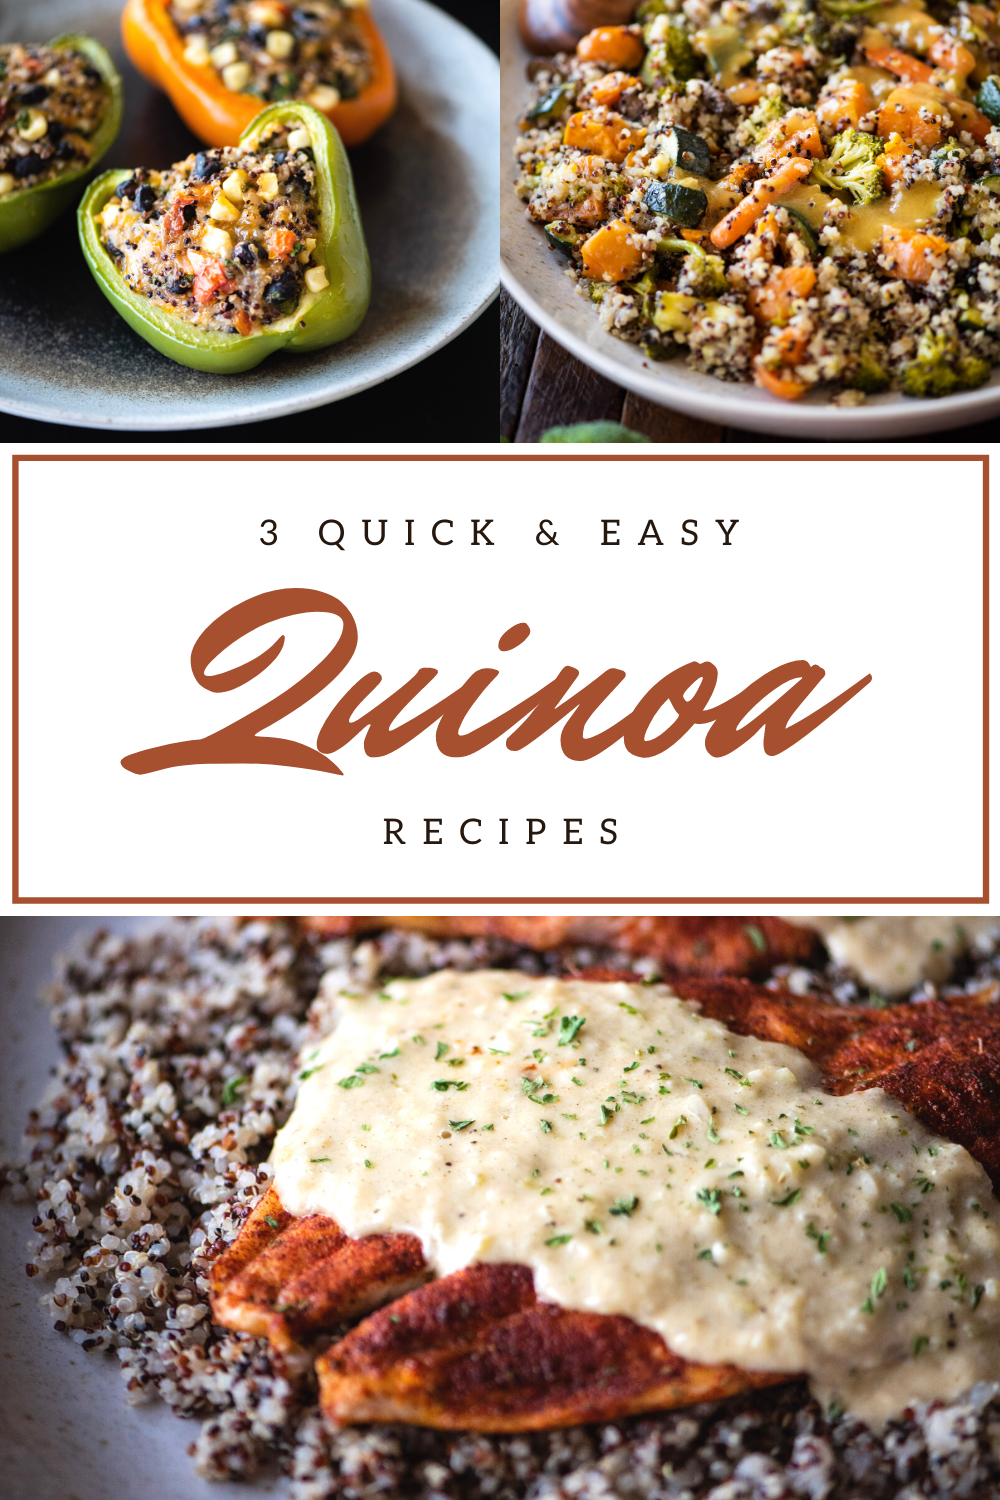 Cooking With Quinoa: 3 Quick & Easy Recipes